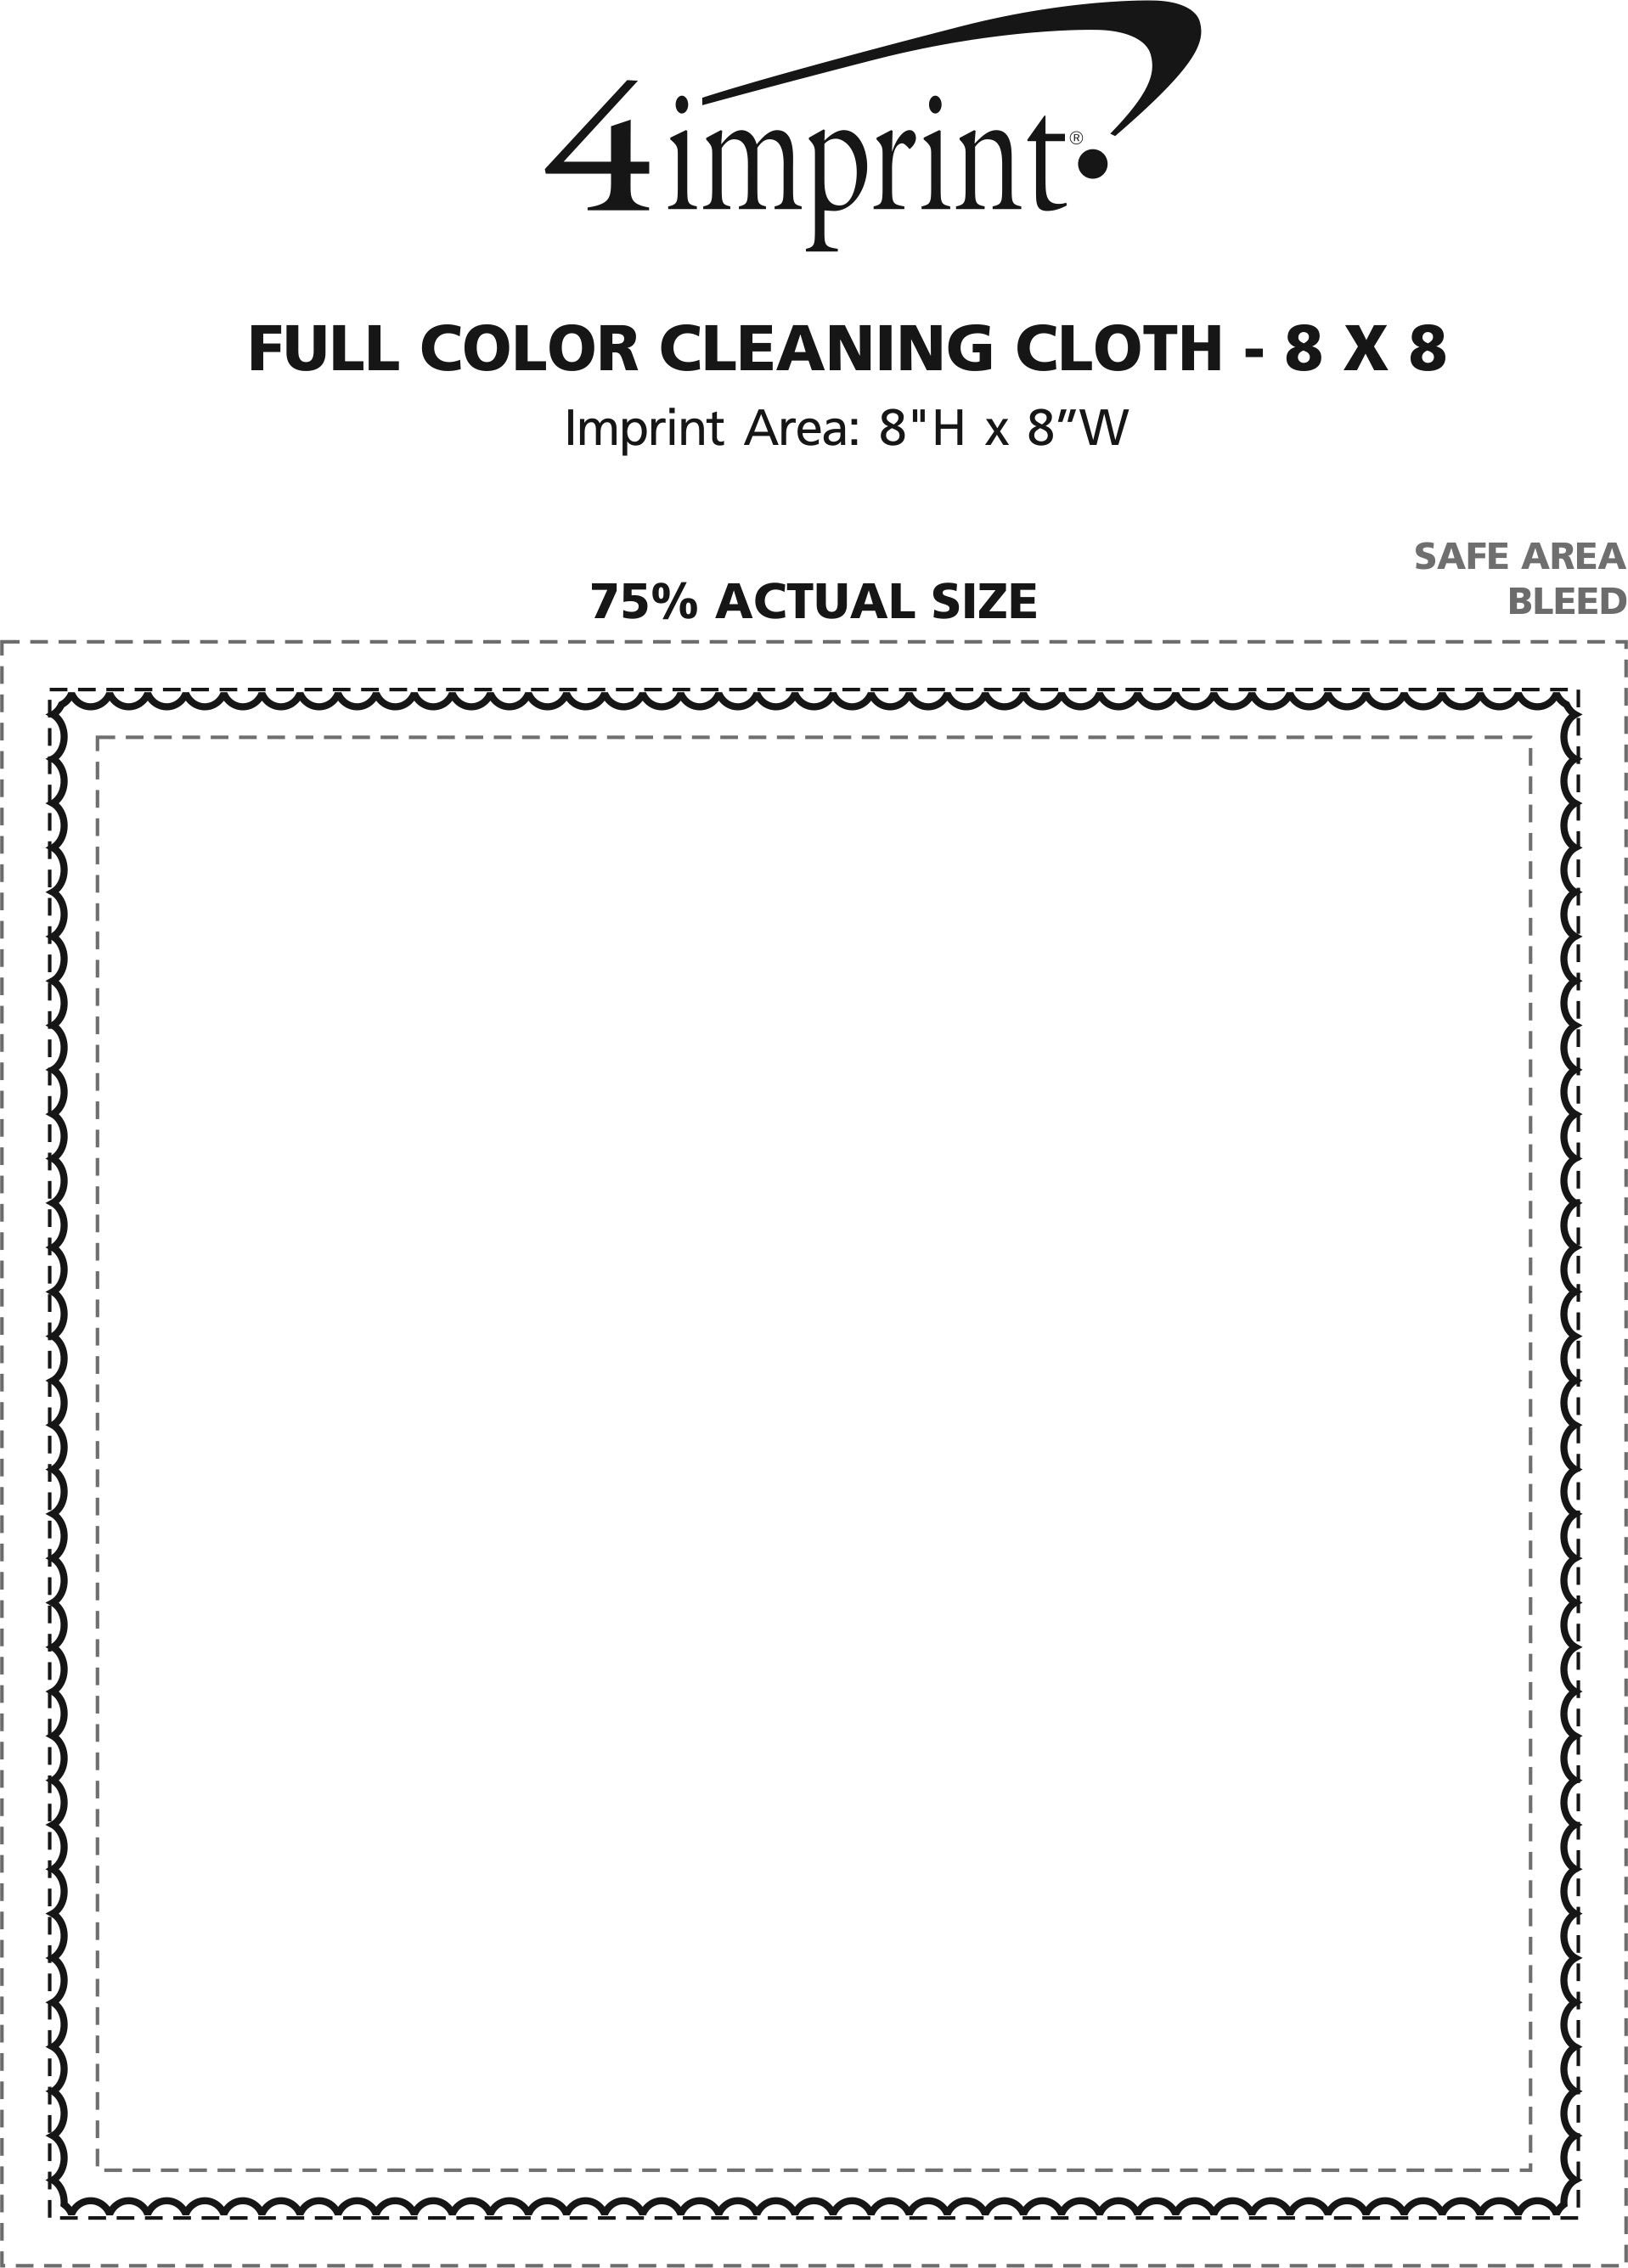 Imprint Area of Full Color Cleaning Cloth - 8" x 8"